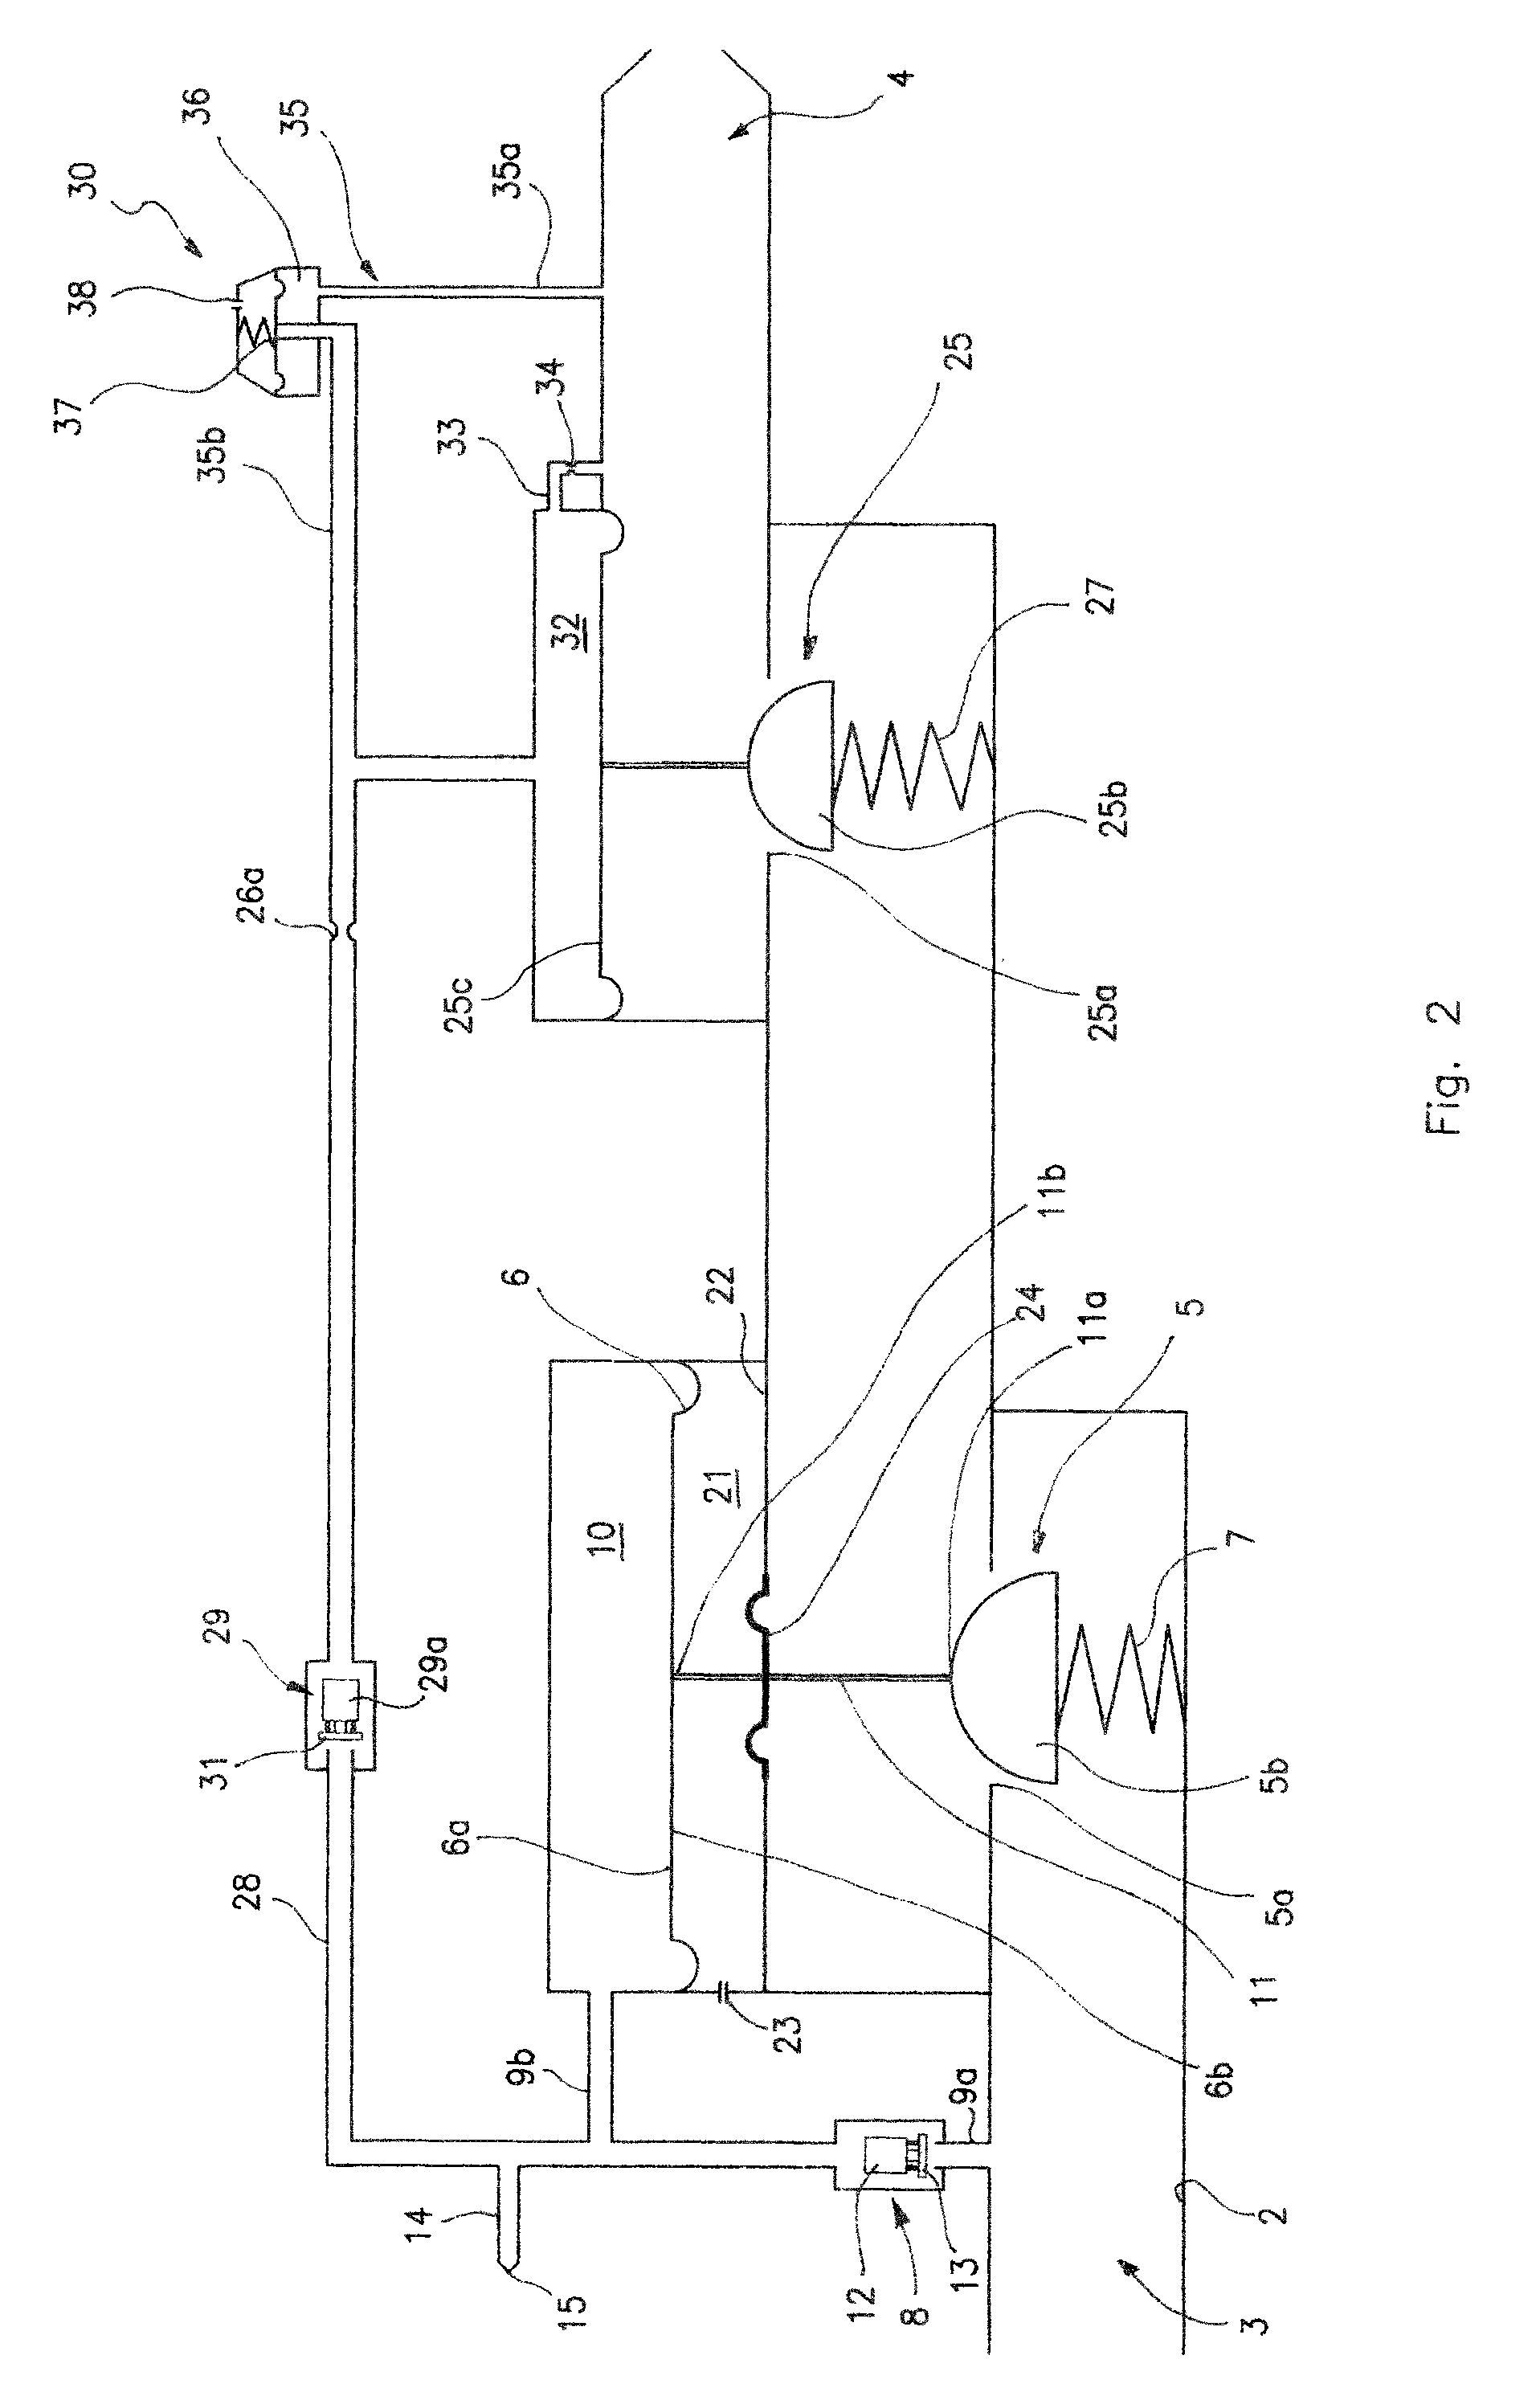 Device for controlling the delivery of a combustible gas to a burner apparatus